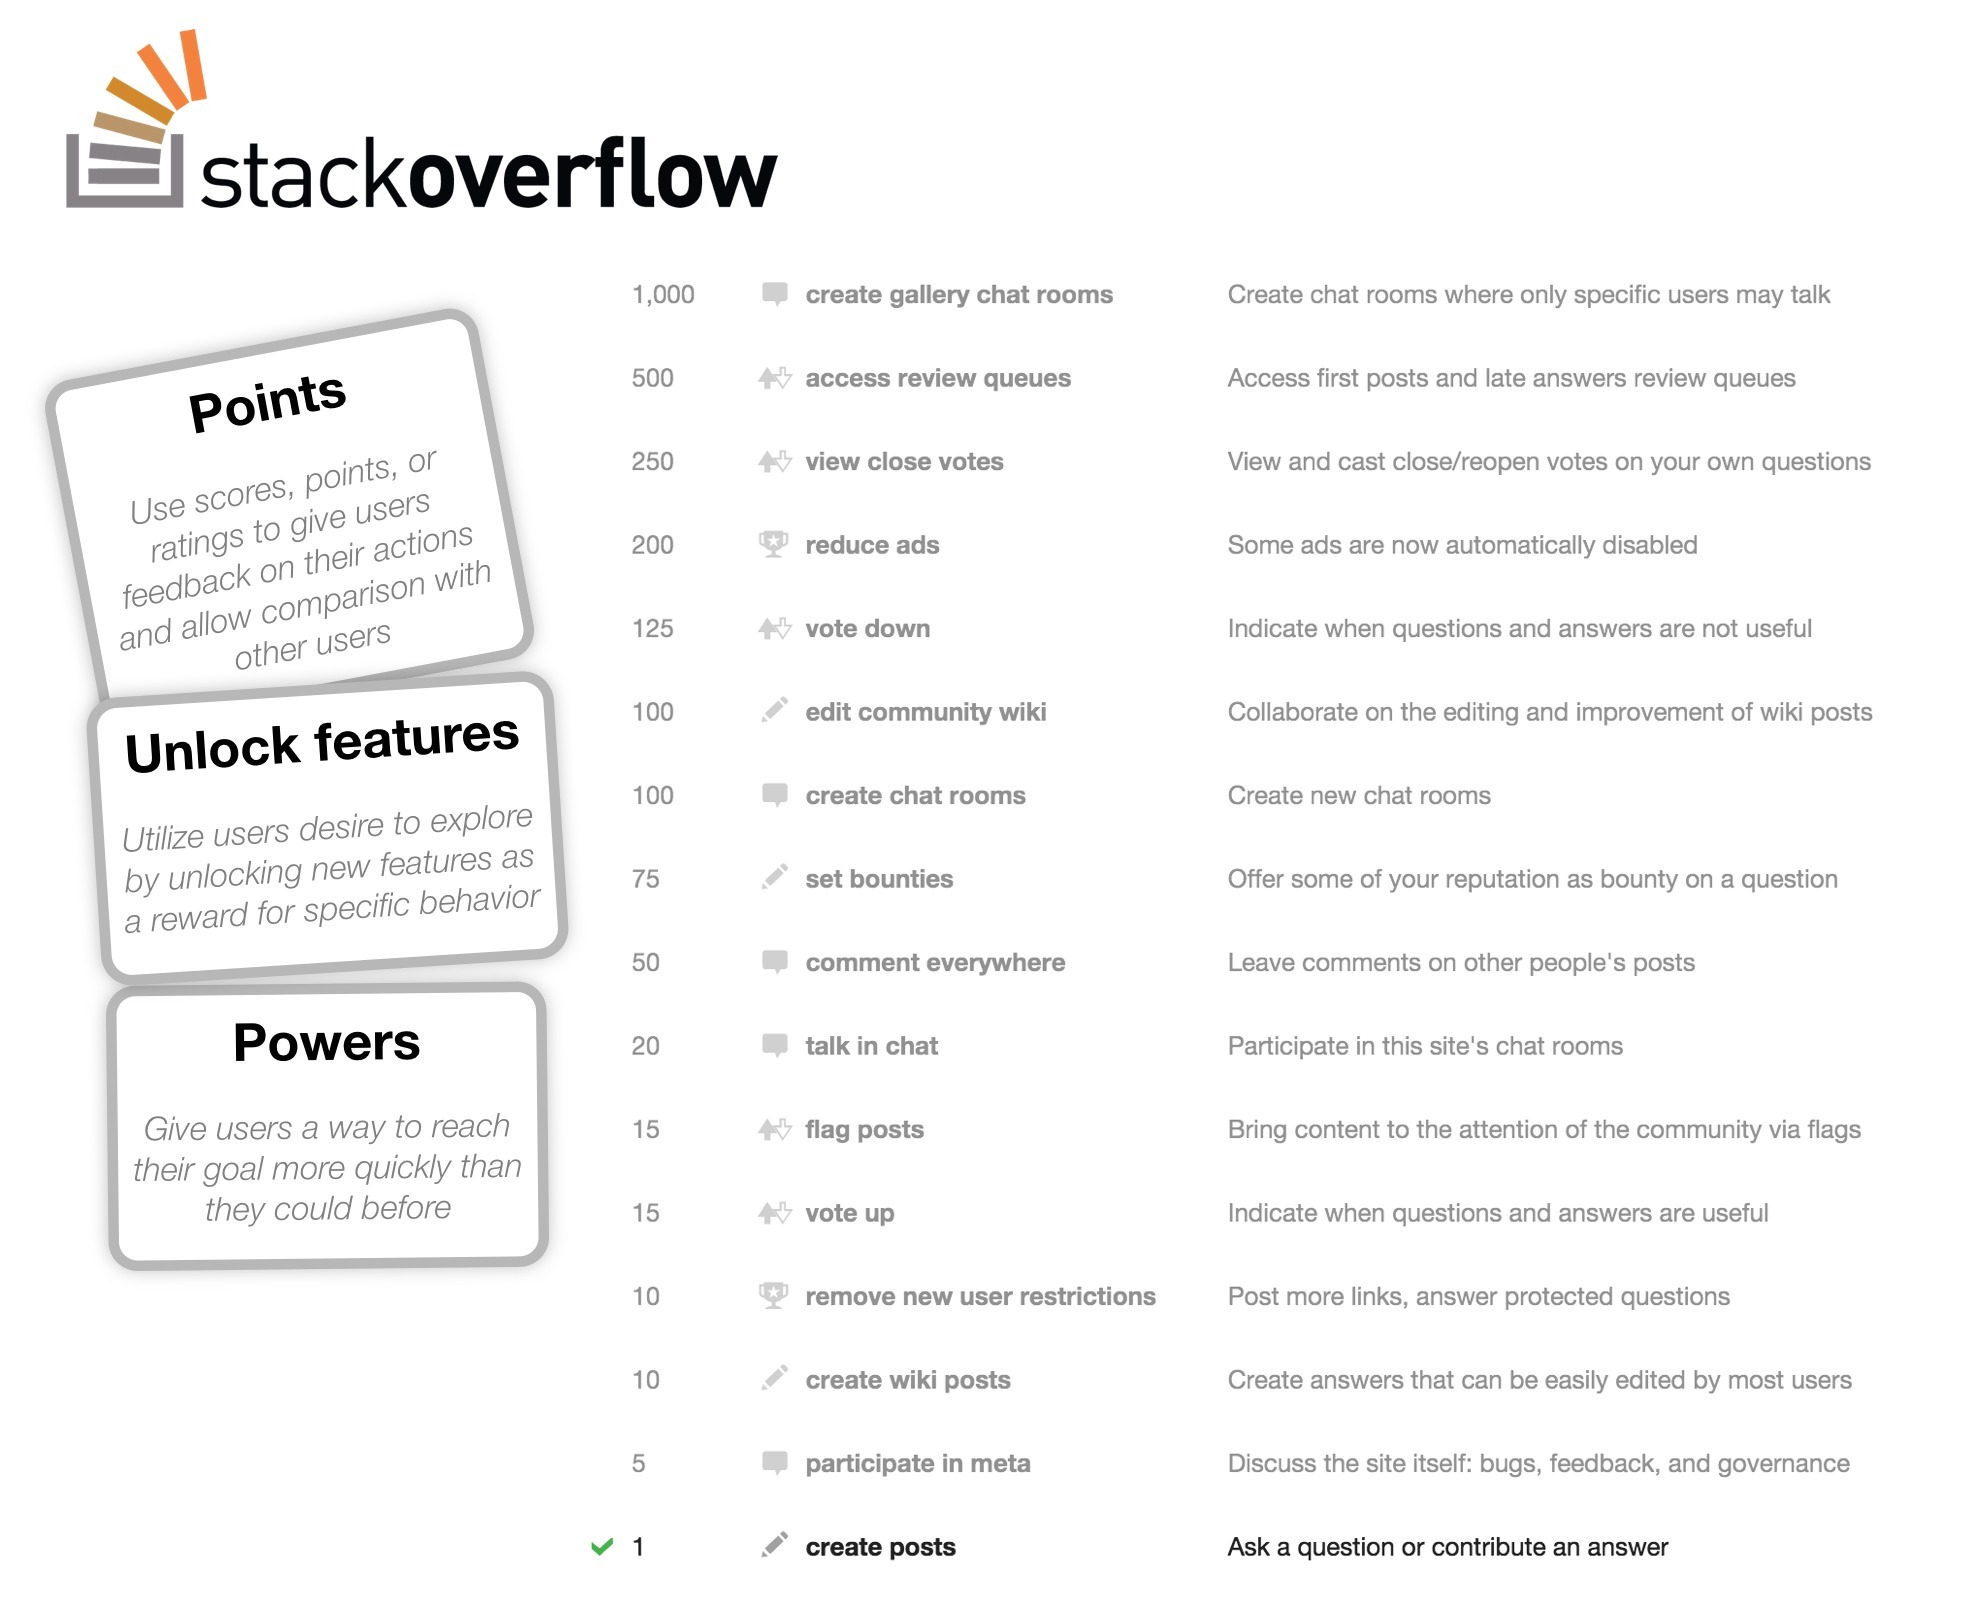 Community participation and good deeds are rewarded with reputation points at StackOverflow.com.